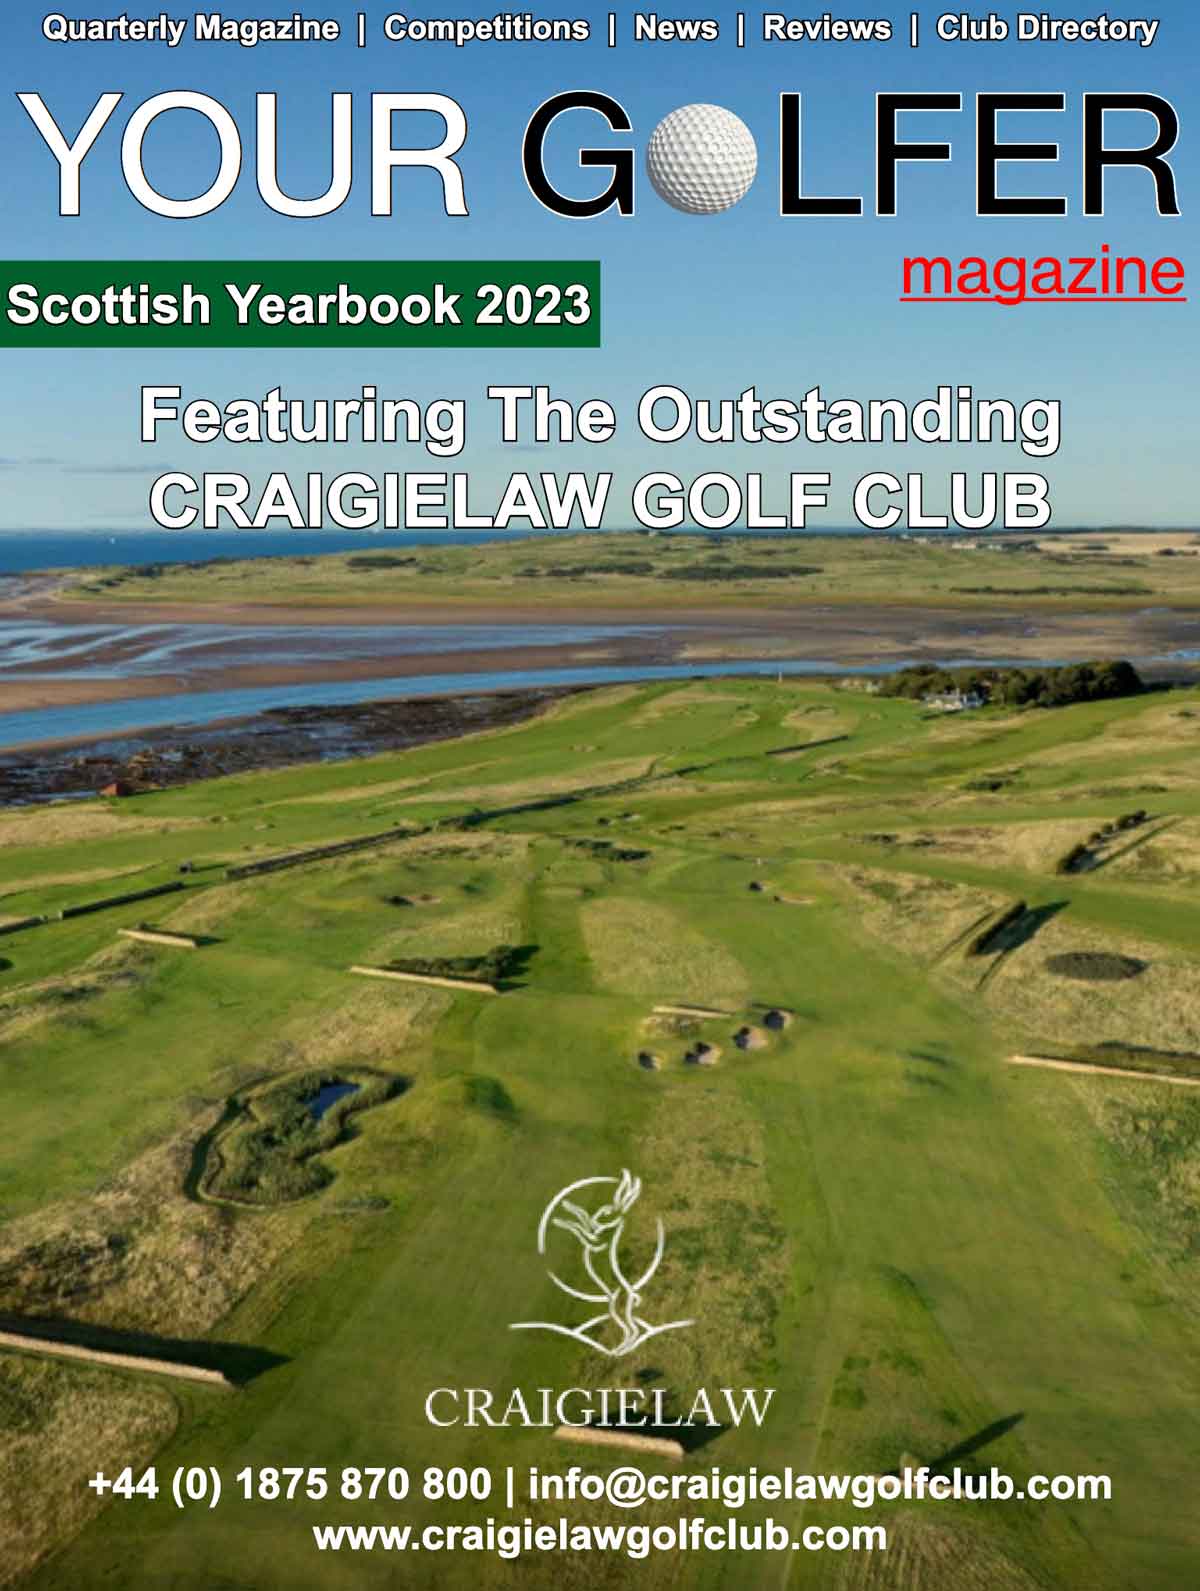 Welsh Yearbook 2023 from Your Golfer Magazine